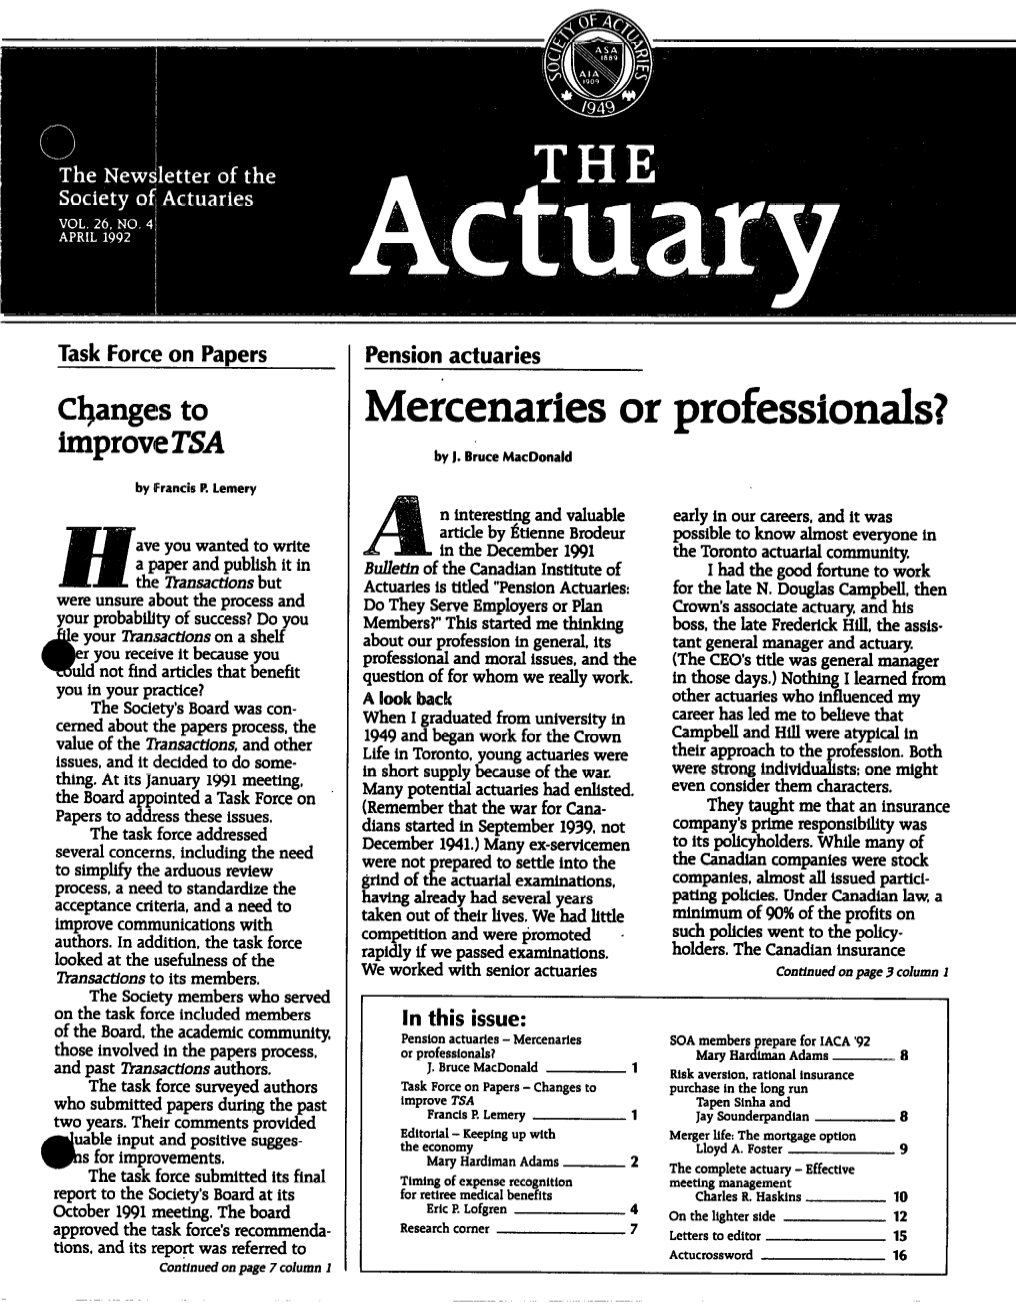 The Actuary--April 1992 2